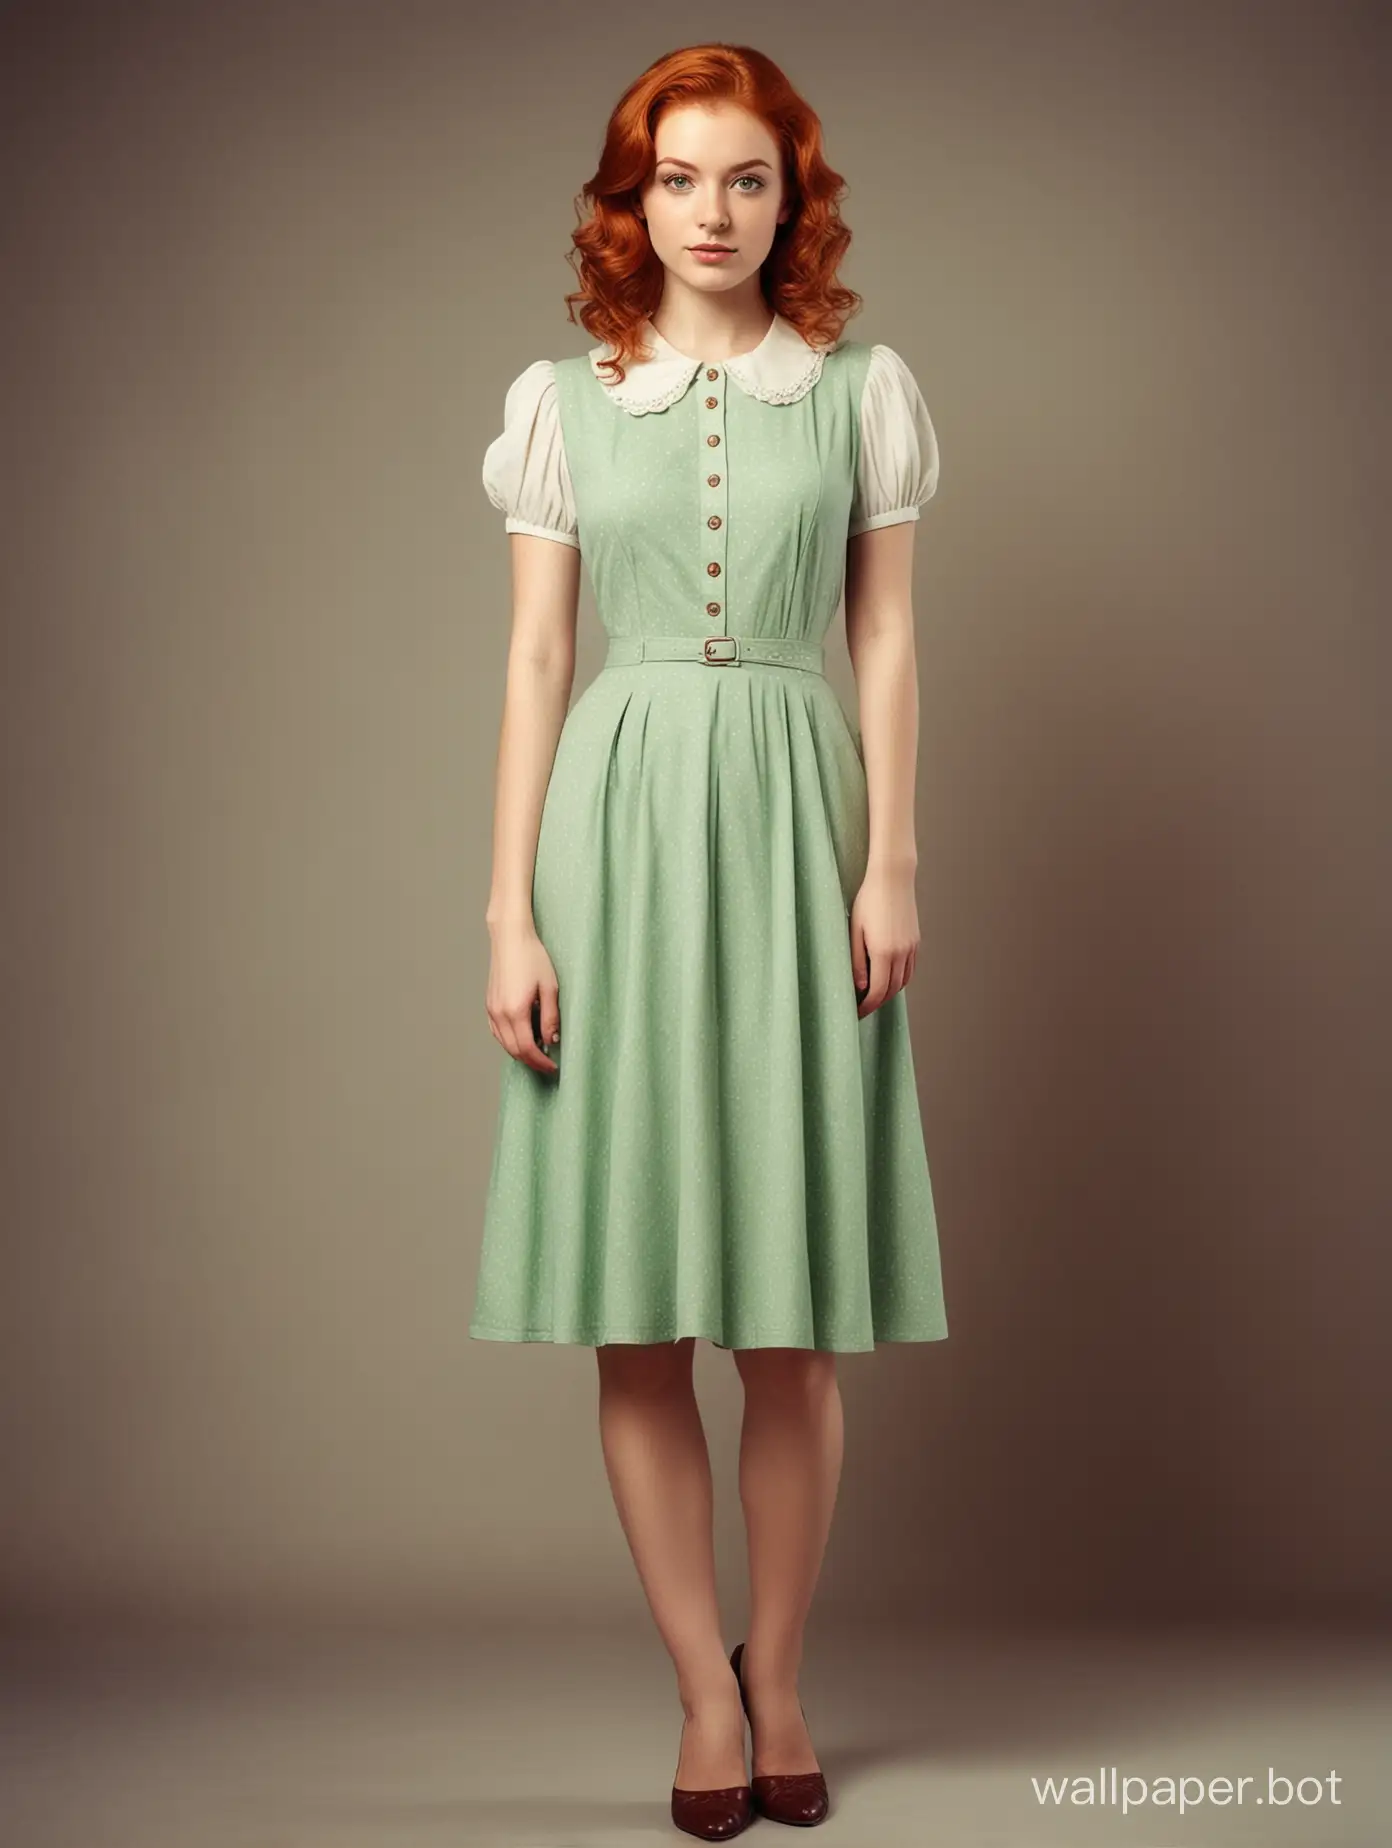 Vintage style. Young lady standing full body. Redhead with green eyes.